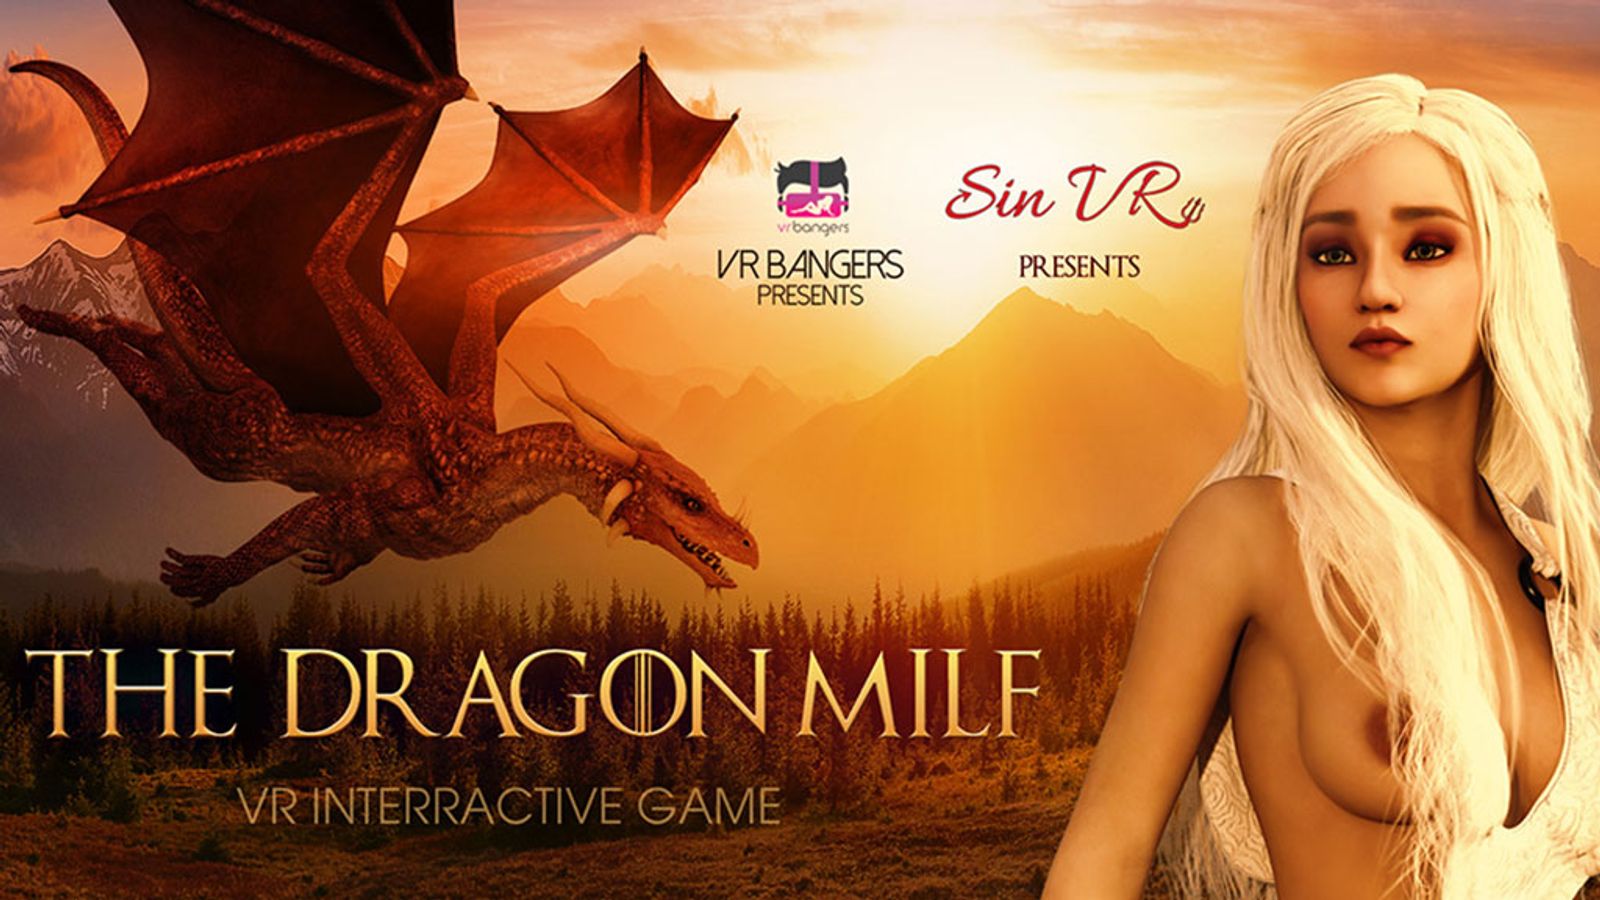 VR Bangers and SinVR Release New VR Game 'The Dragon MILF'